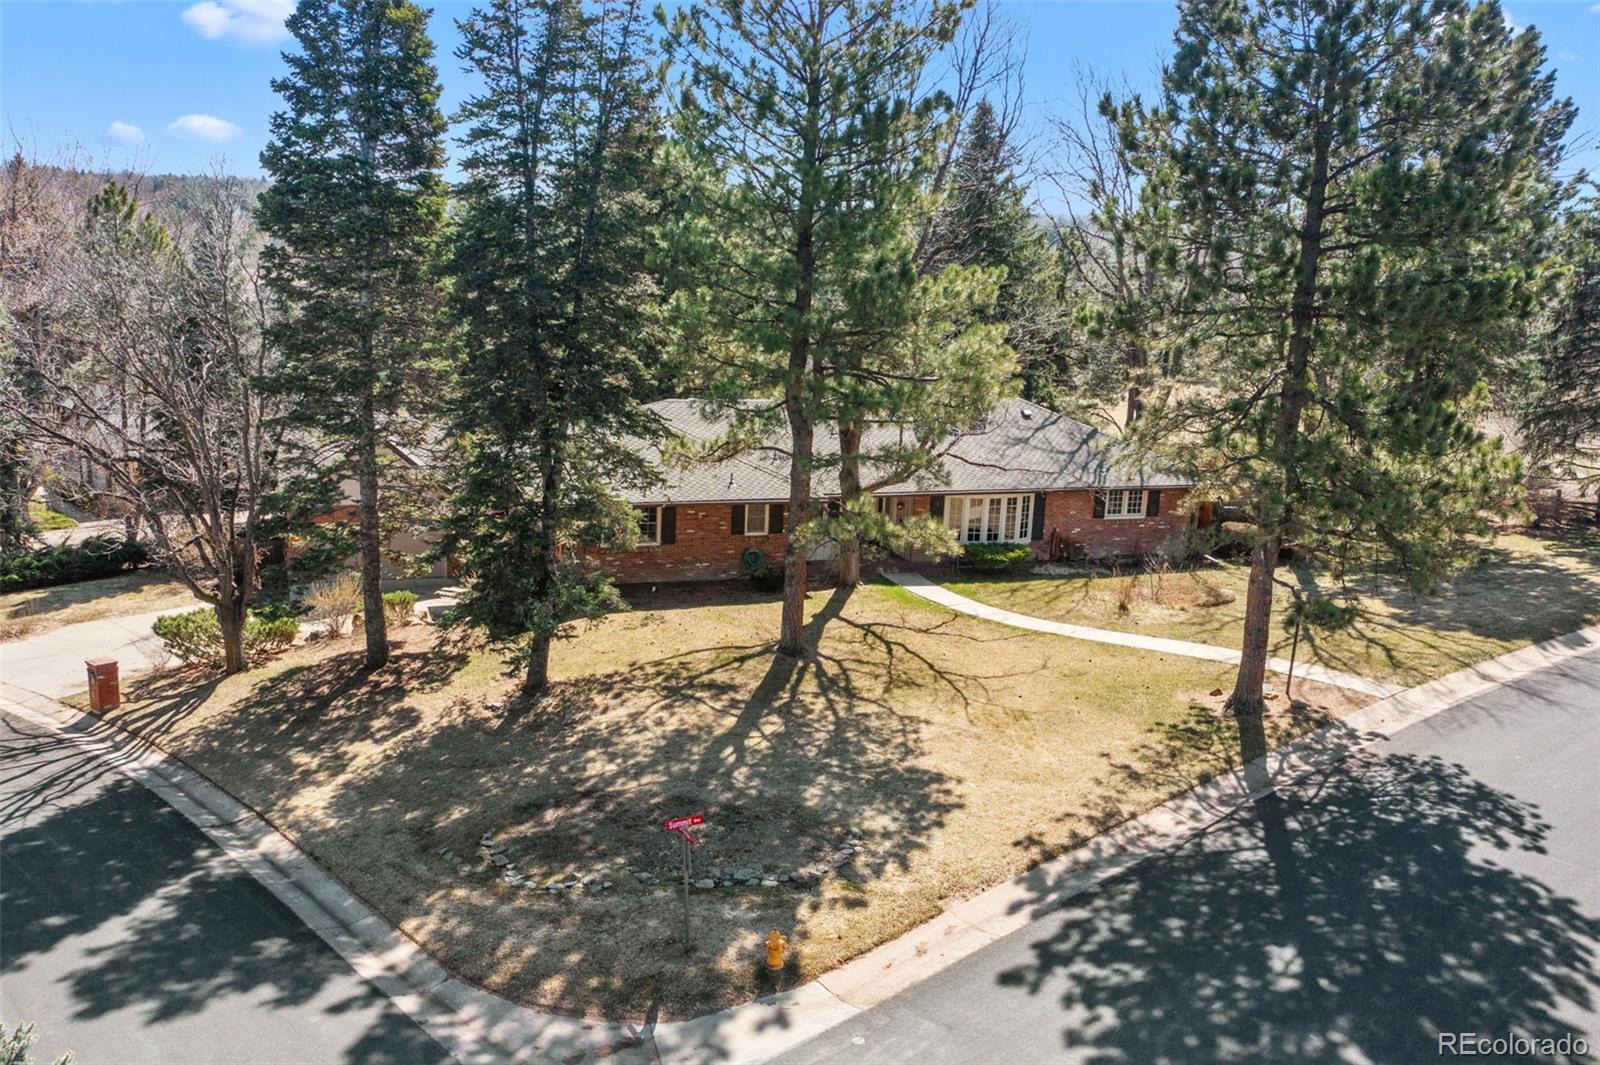 Report Image for 8  Cherry Vale Drive,Cherry Hills Village, Colorado